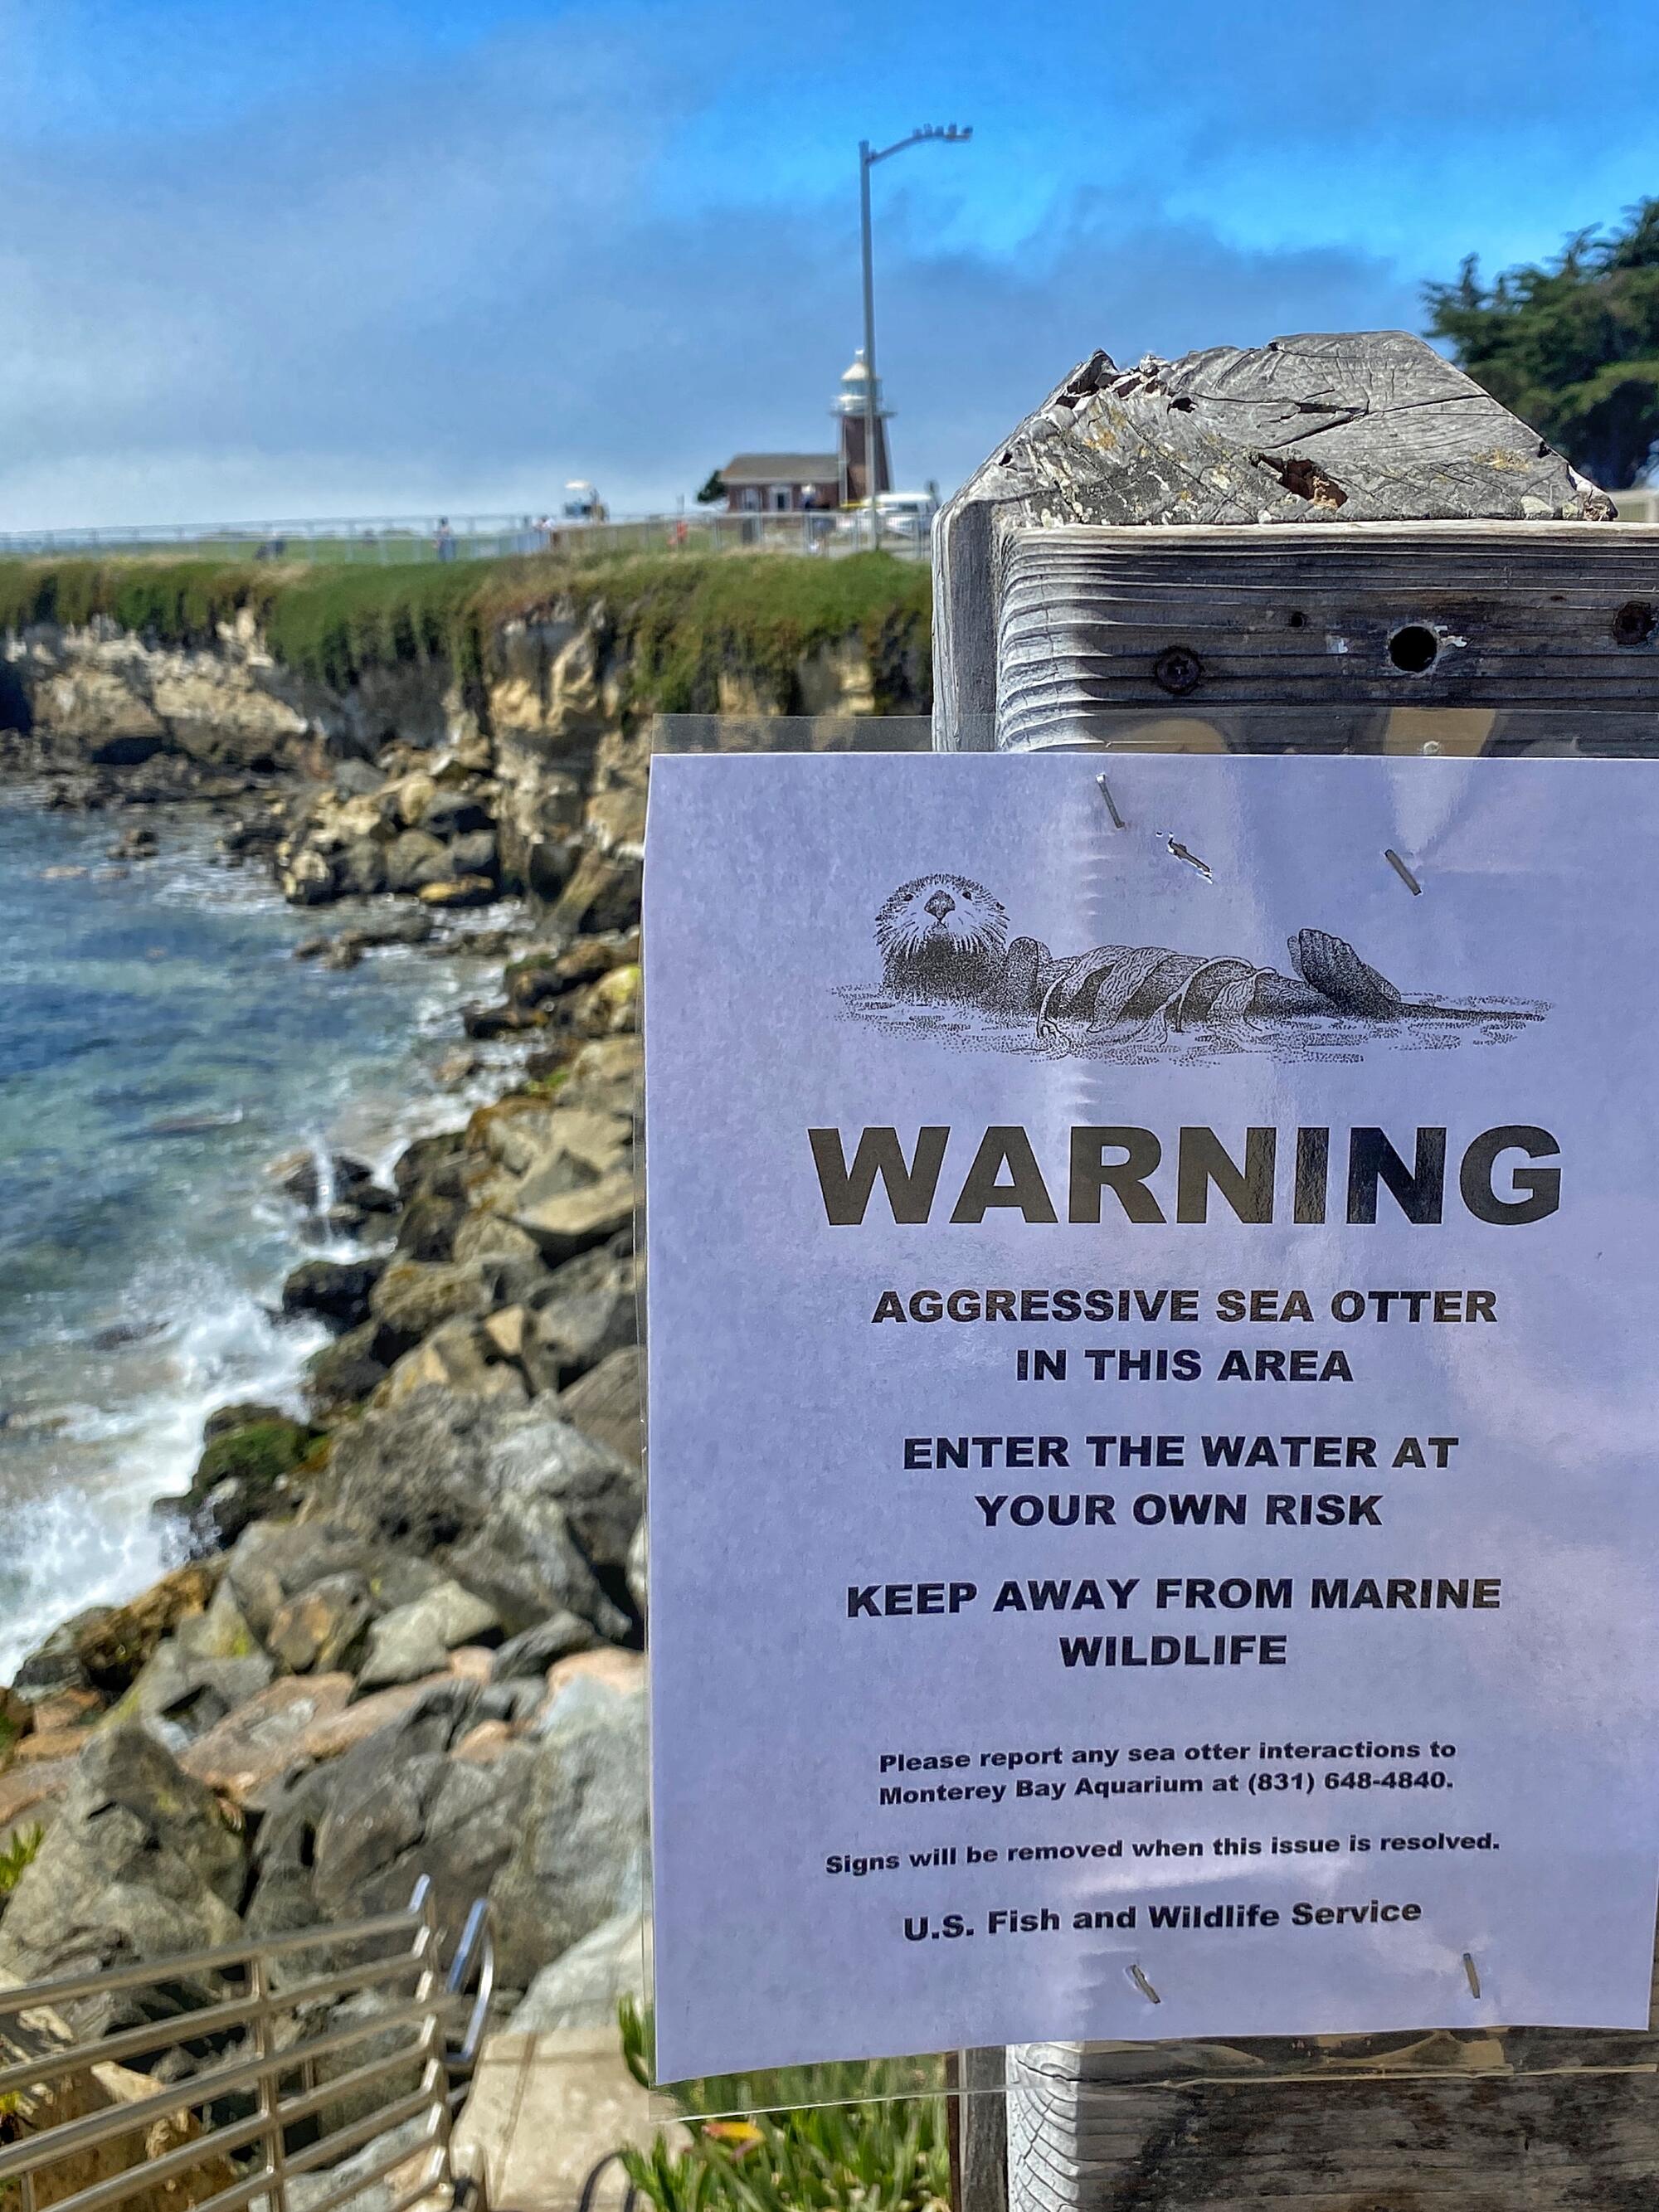 A sign warns swimmers that a "aggressive sea otter" East "in the zone."